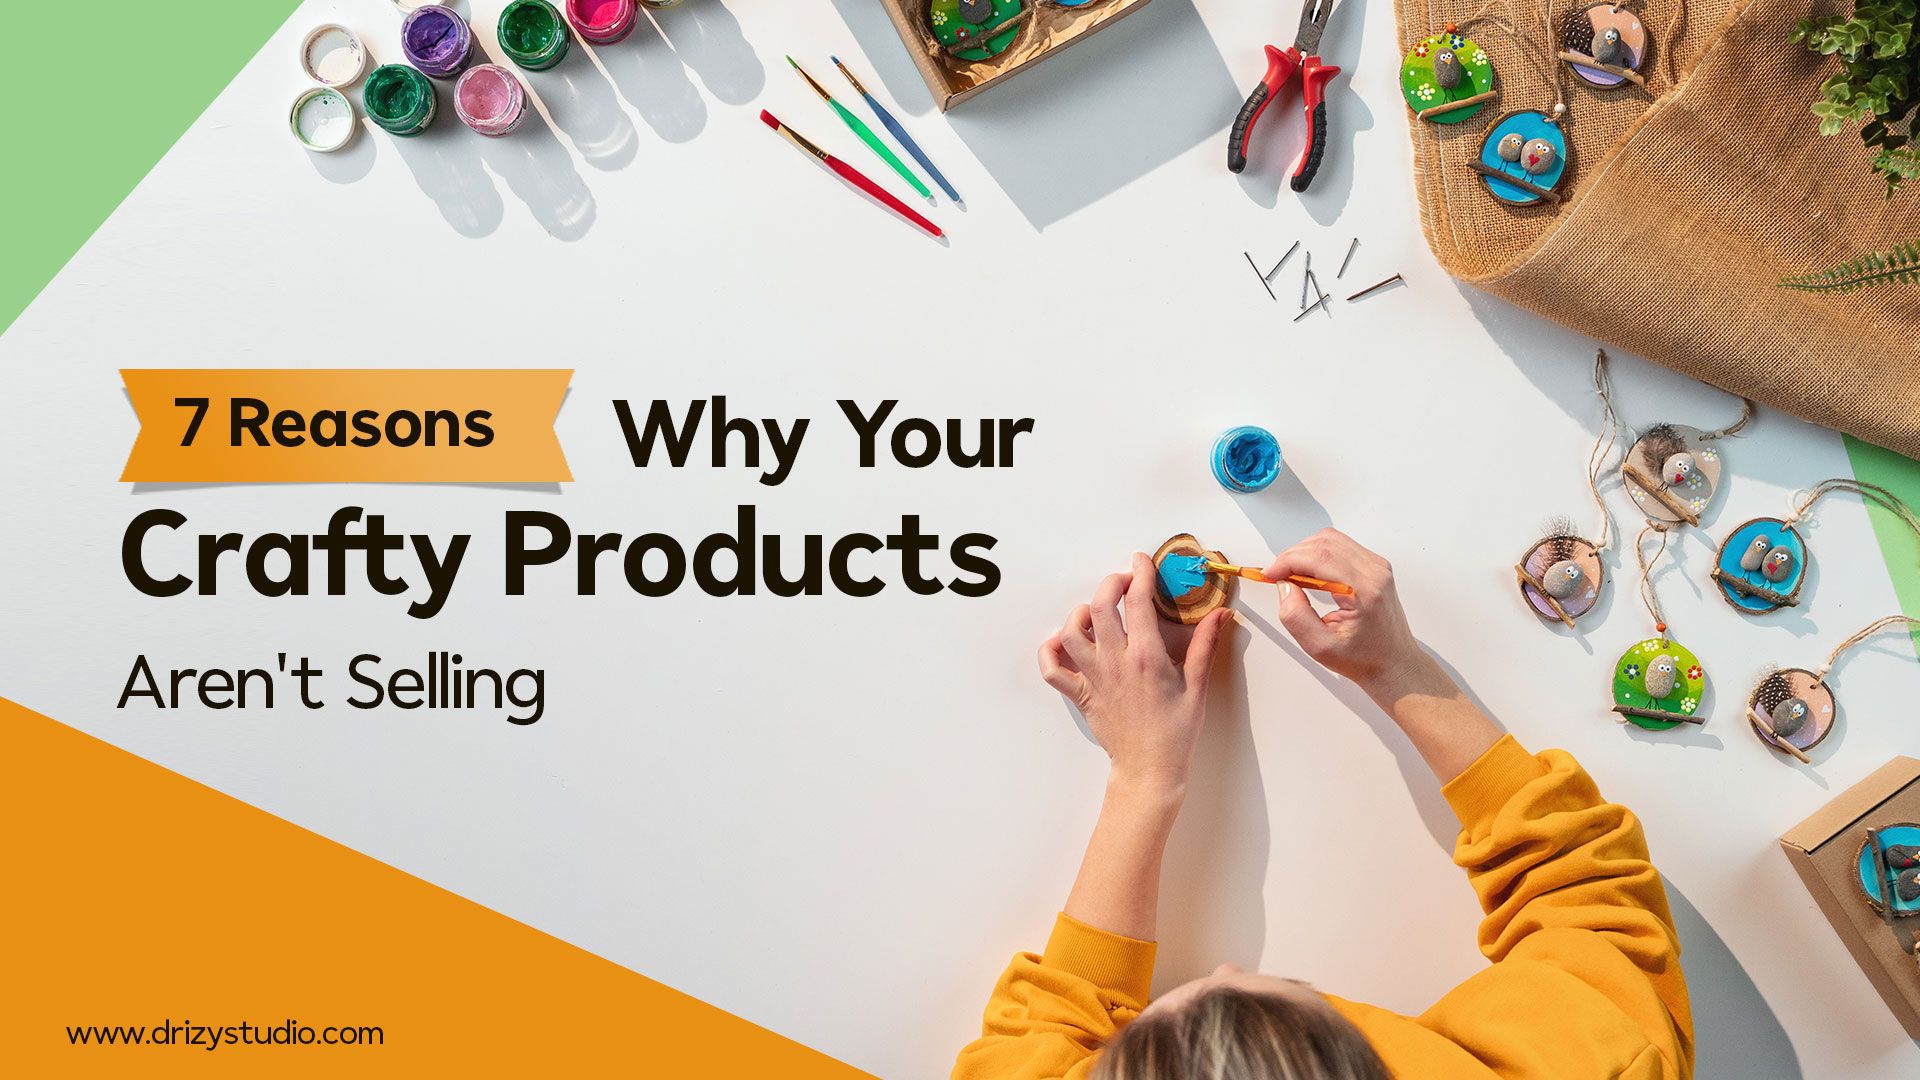 7 Reasons Why Your Handmade Crafty Products Arent Selling cover